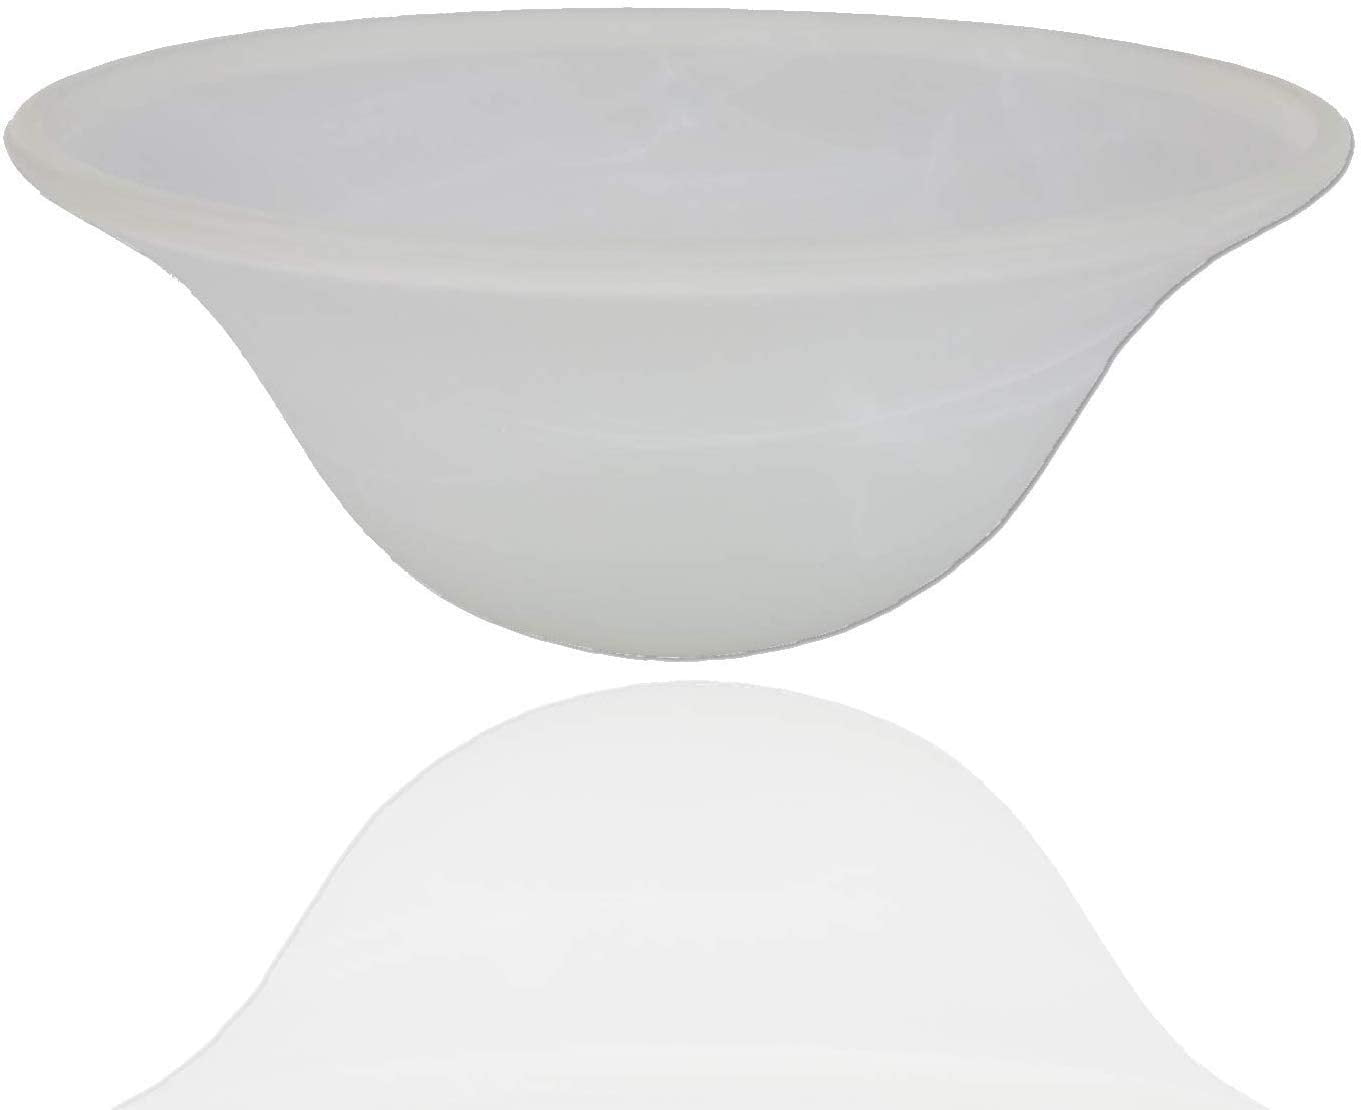 White Alabaster Swirl Glass Bowl Shade, Glass Dome Table Lamp Shade Replacement